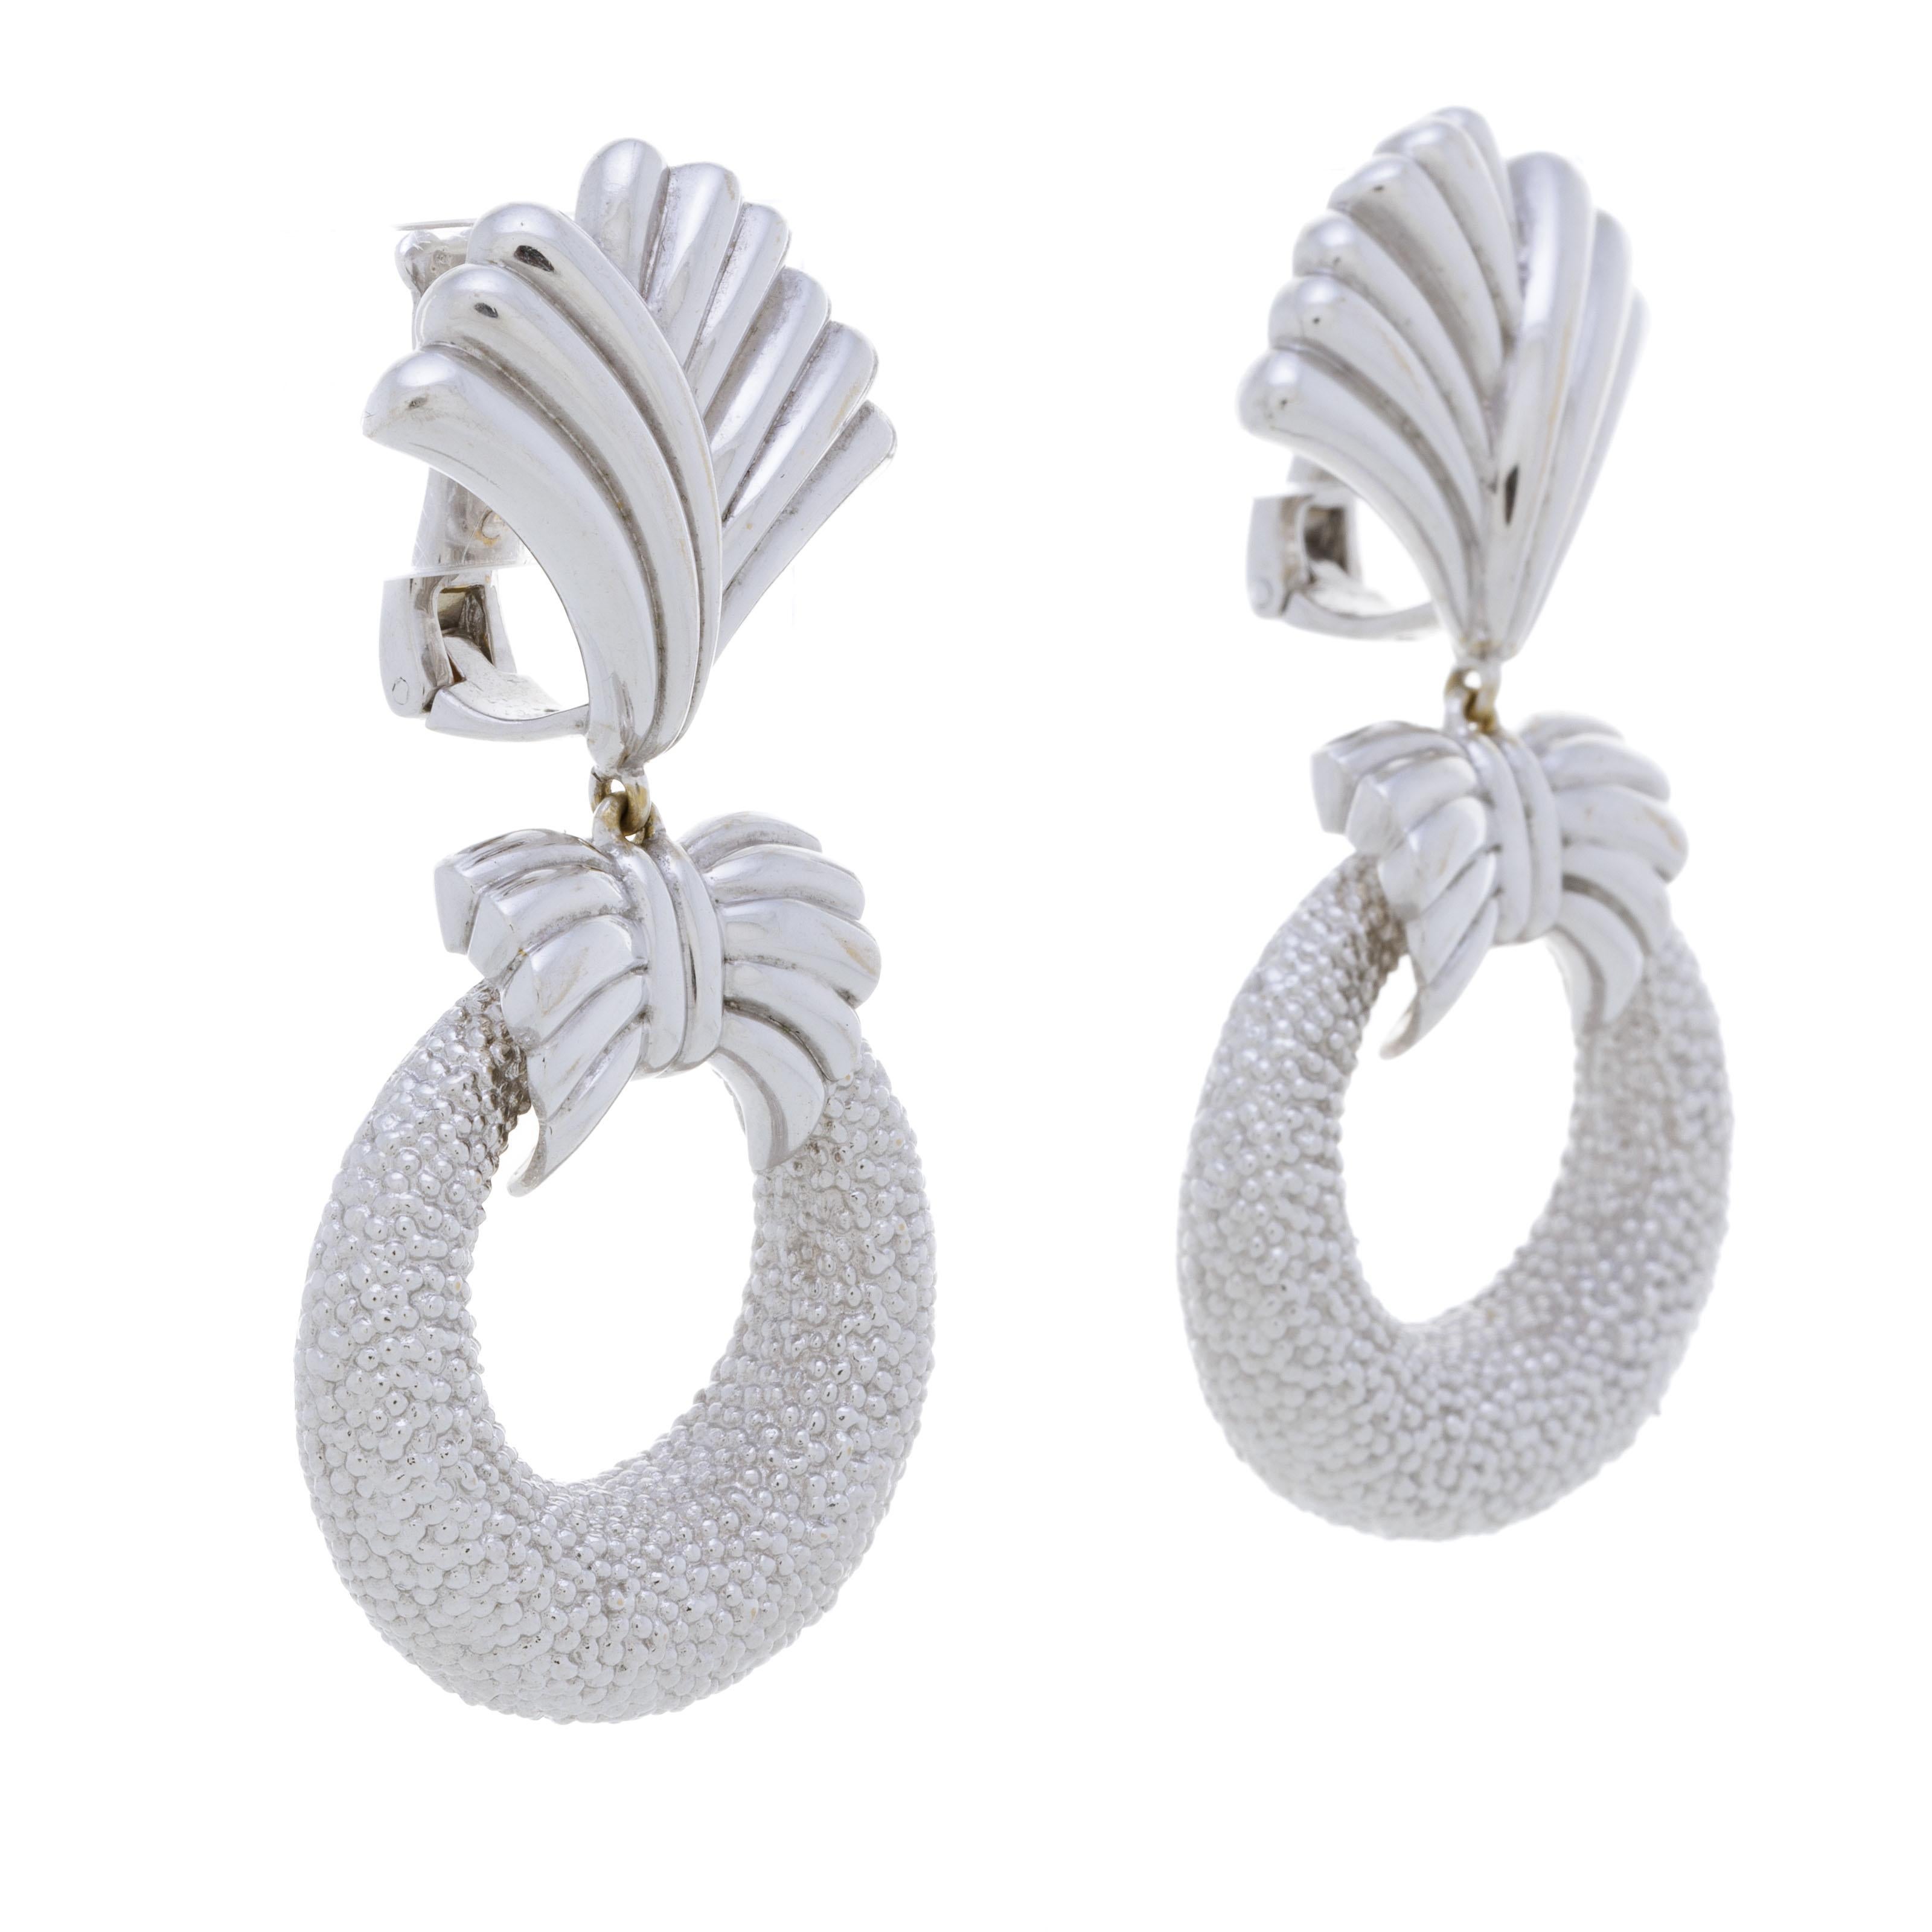 Van Cleef & Arpels Godron 5-in-1 White Gold Interchangeable Pendant Earrings  In Excellent Condition For Sale In New York, NY